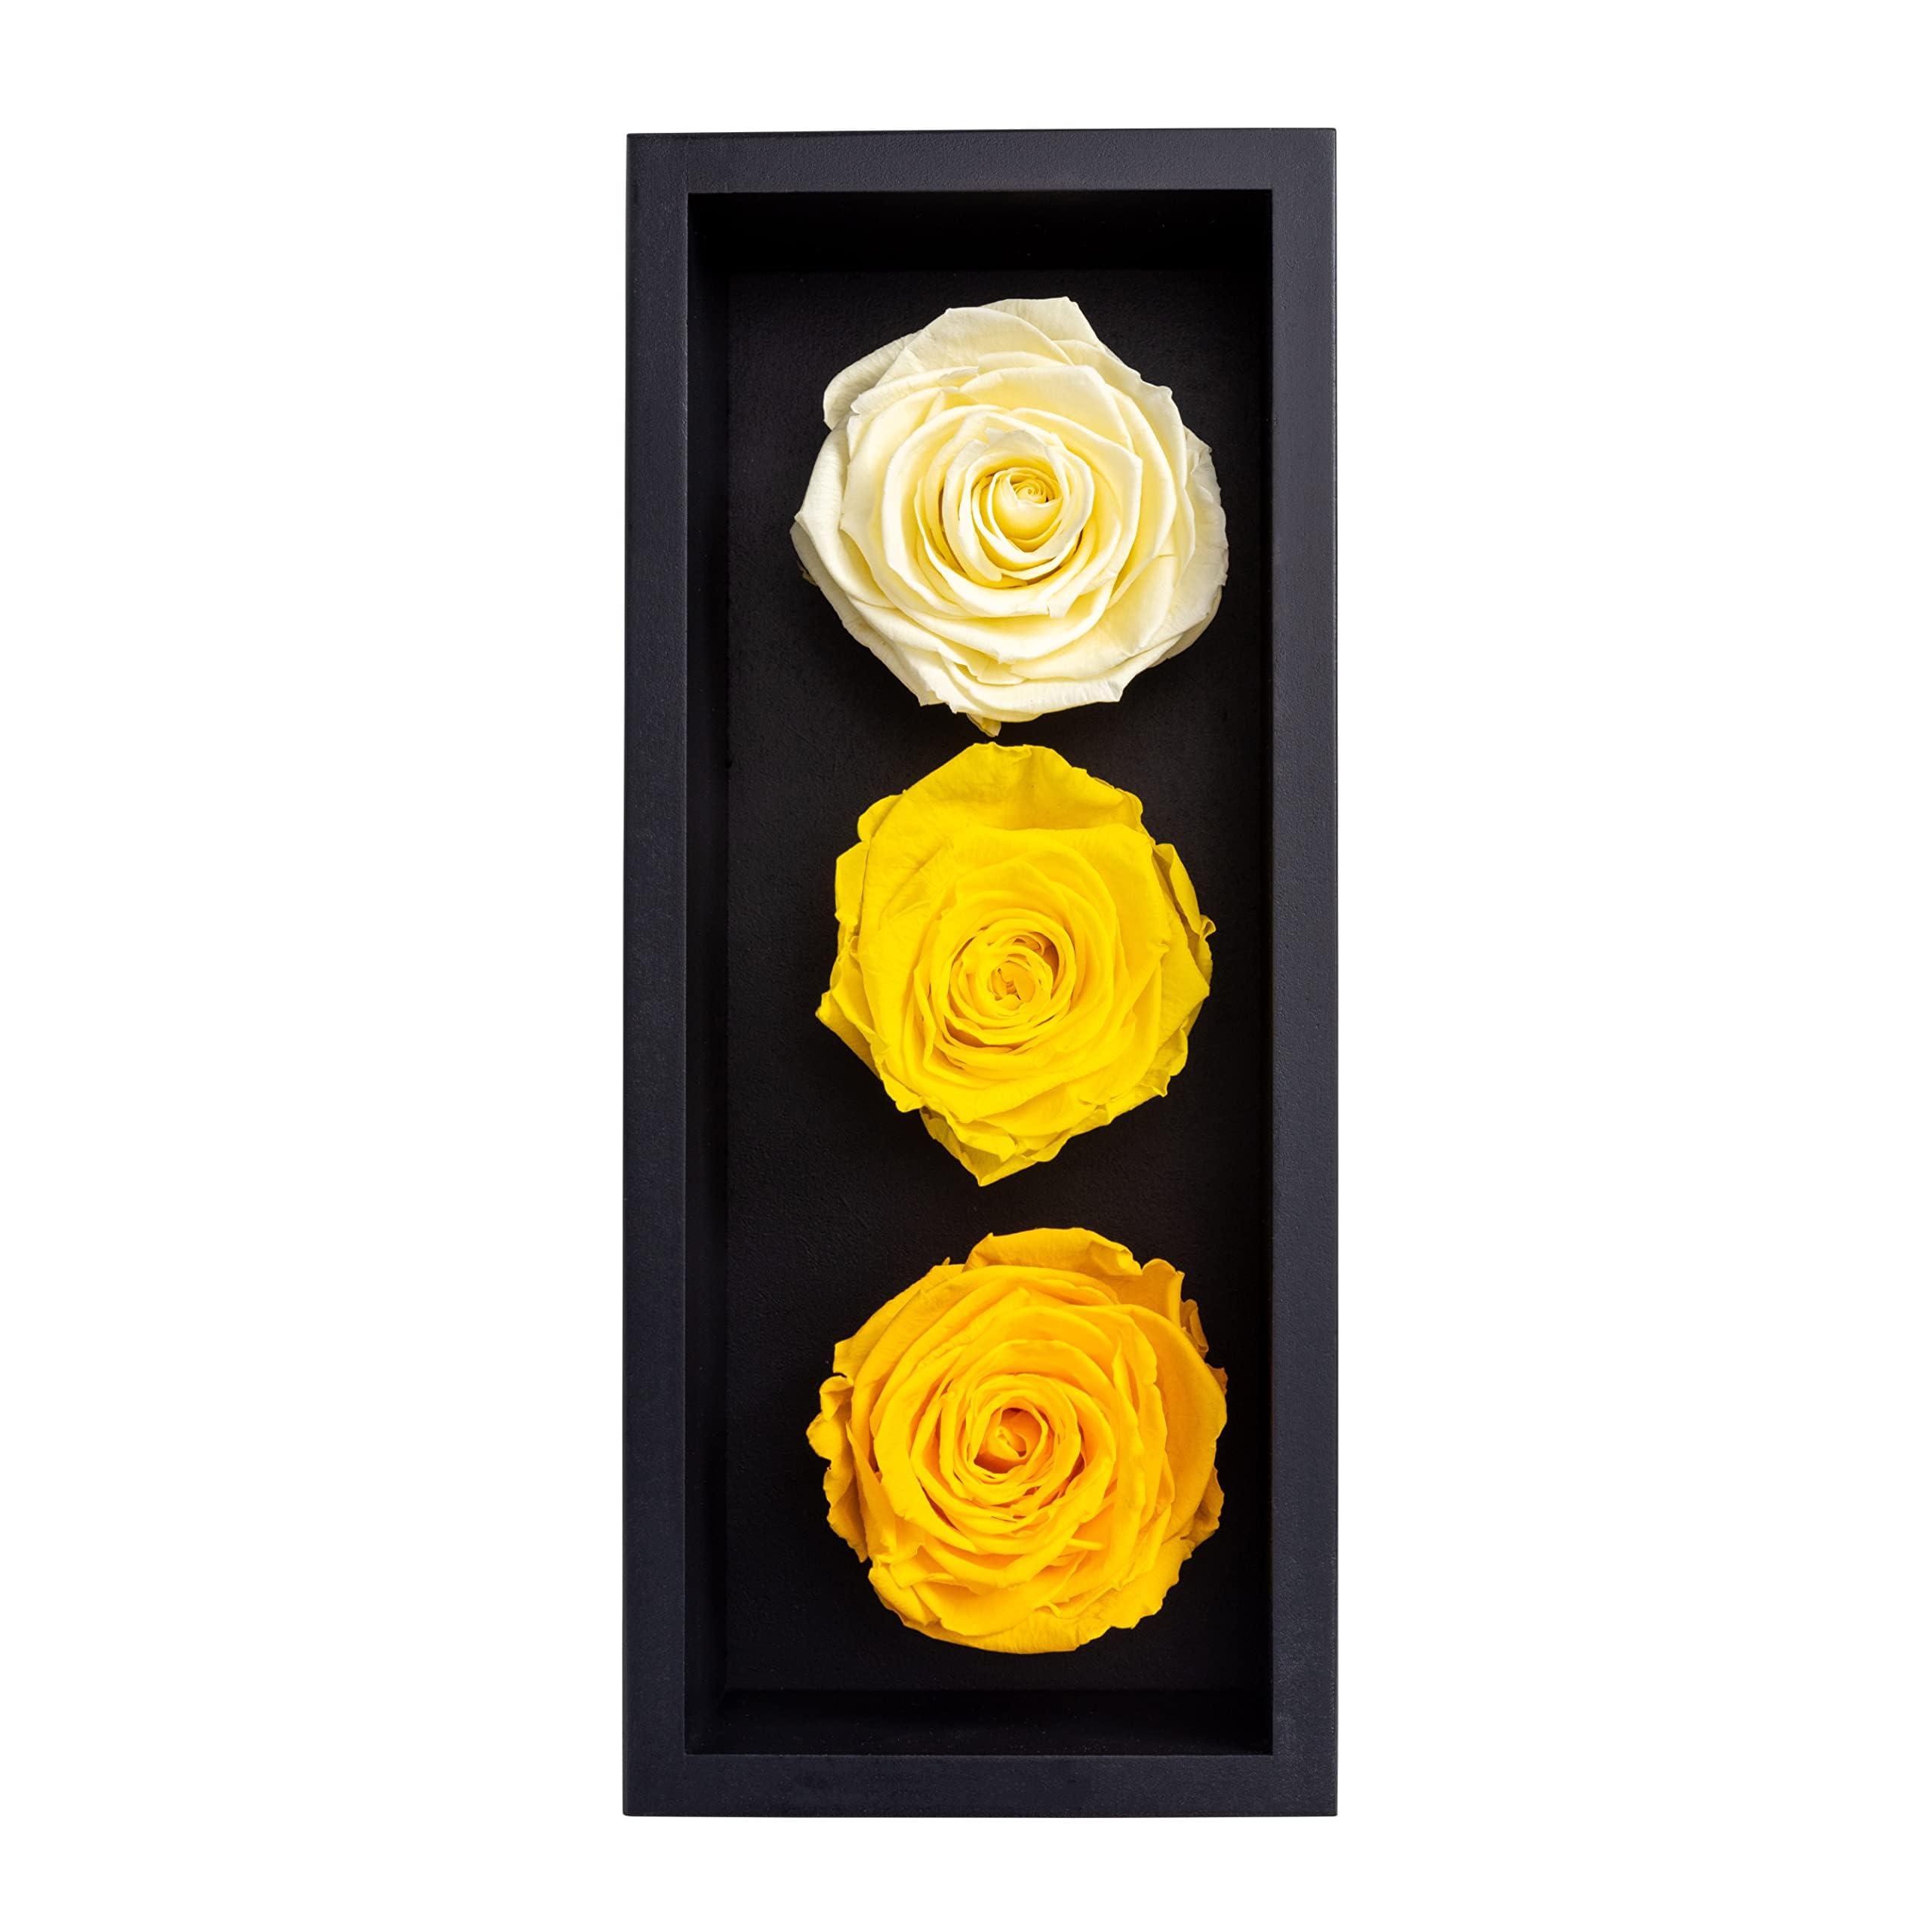 Khiva Graduation Preserved Roses in Wood Box, 3 Yellow Birthday Flowers for Delivery Prime, Everlasting Flowers, Natural Forever Roses That Last for Years, Eternal Rose, Gift Delivery for Mum 2